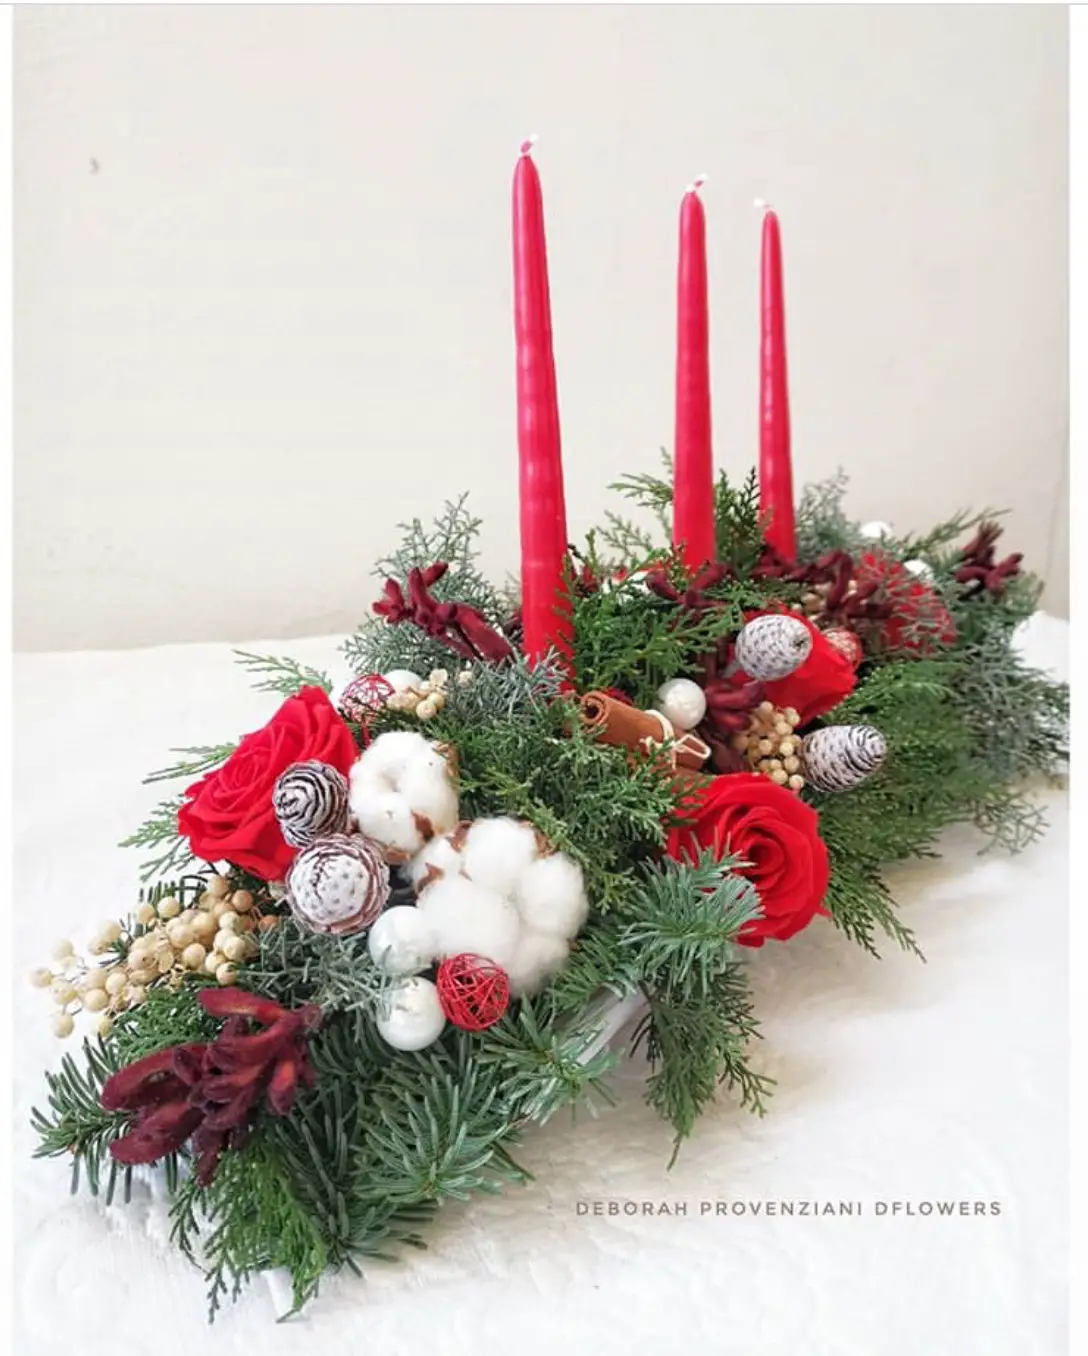 13 Beautiful Christmas Centerpieces For Your Table - The Wonder Cottage